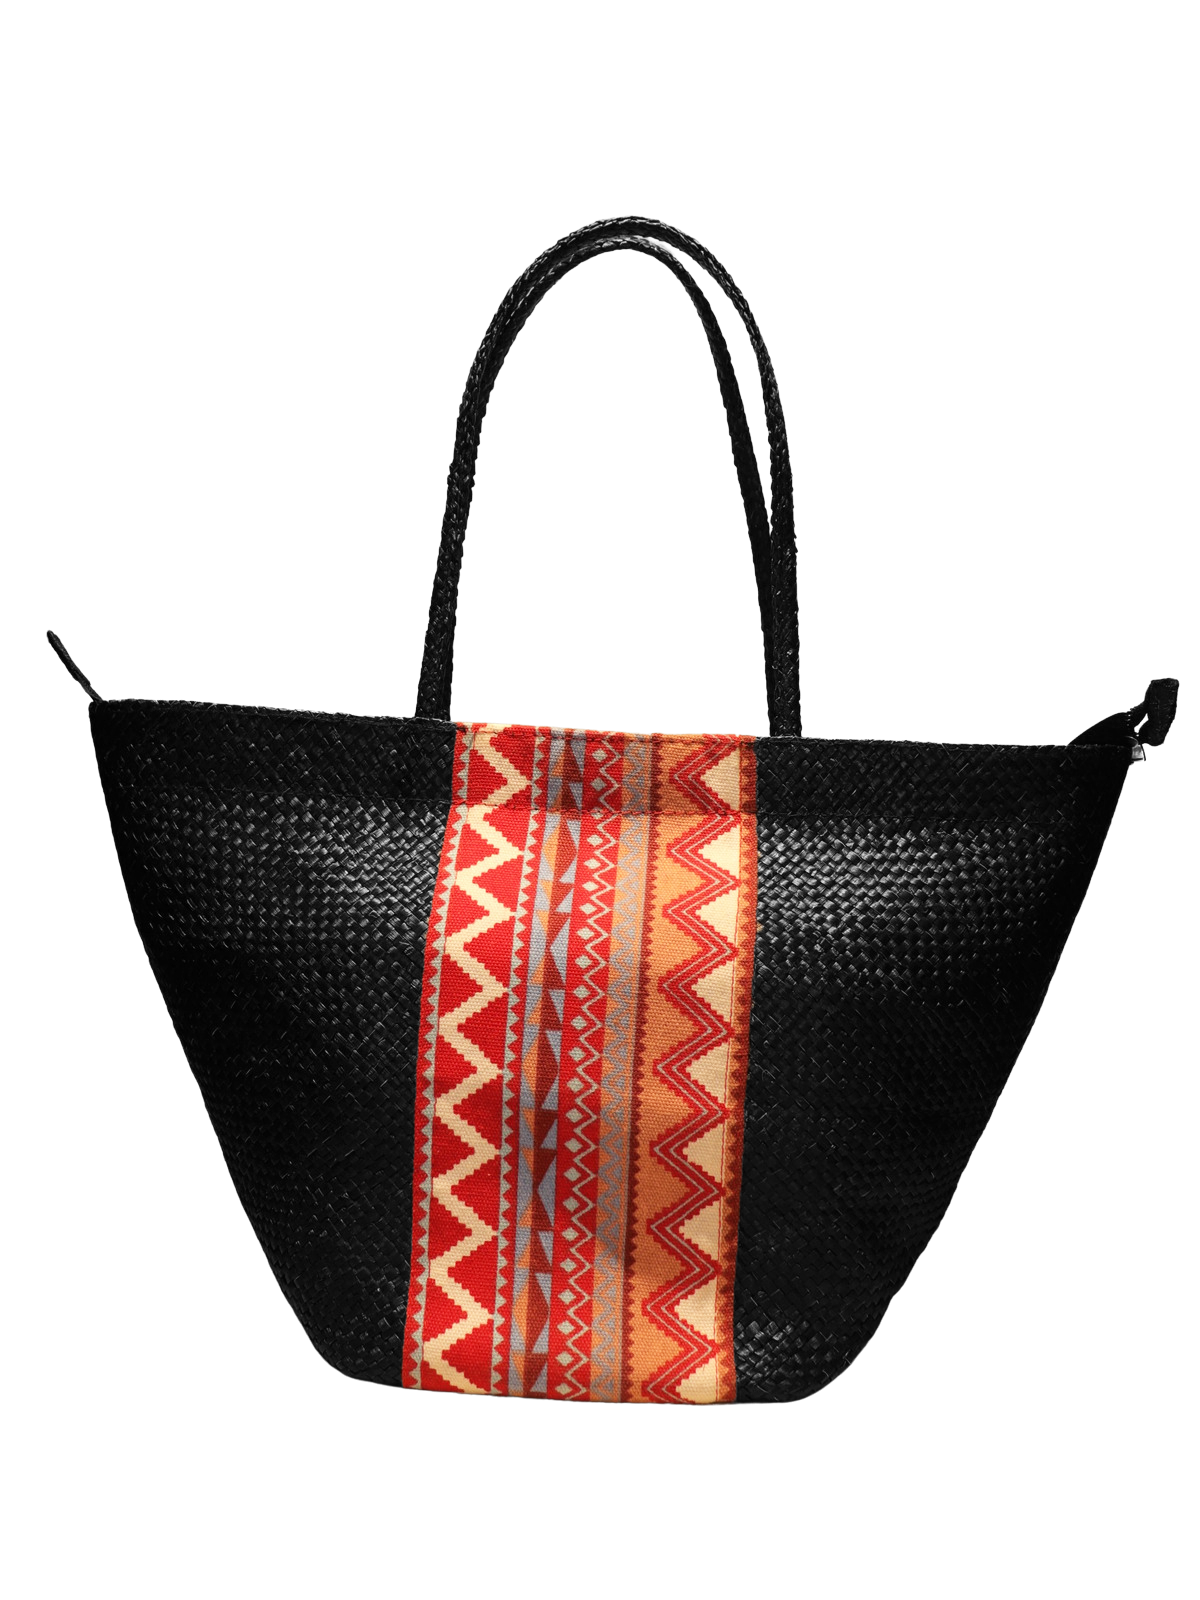 Black Bag with Baguio Cloth - Large